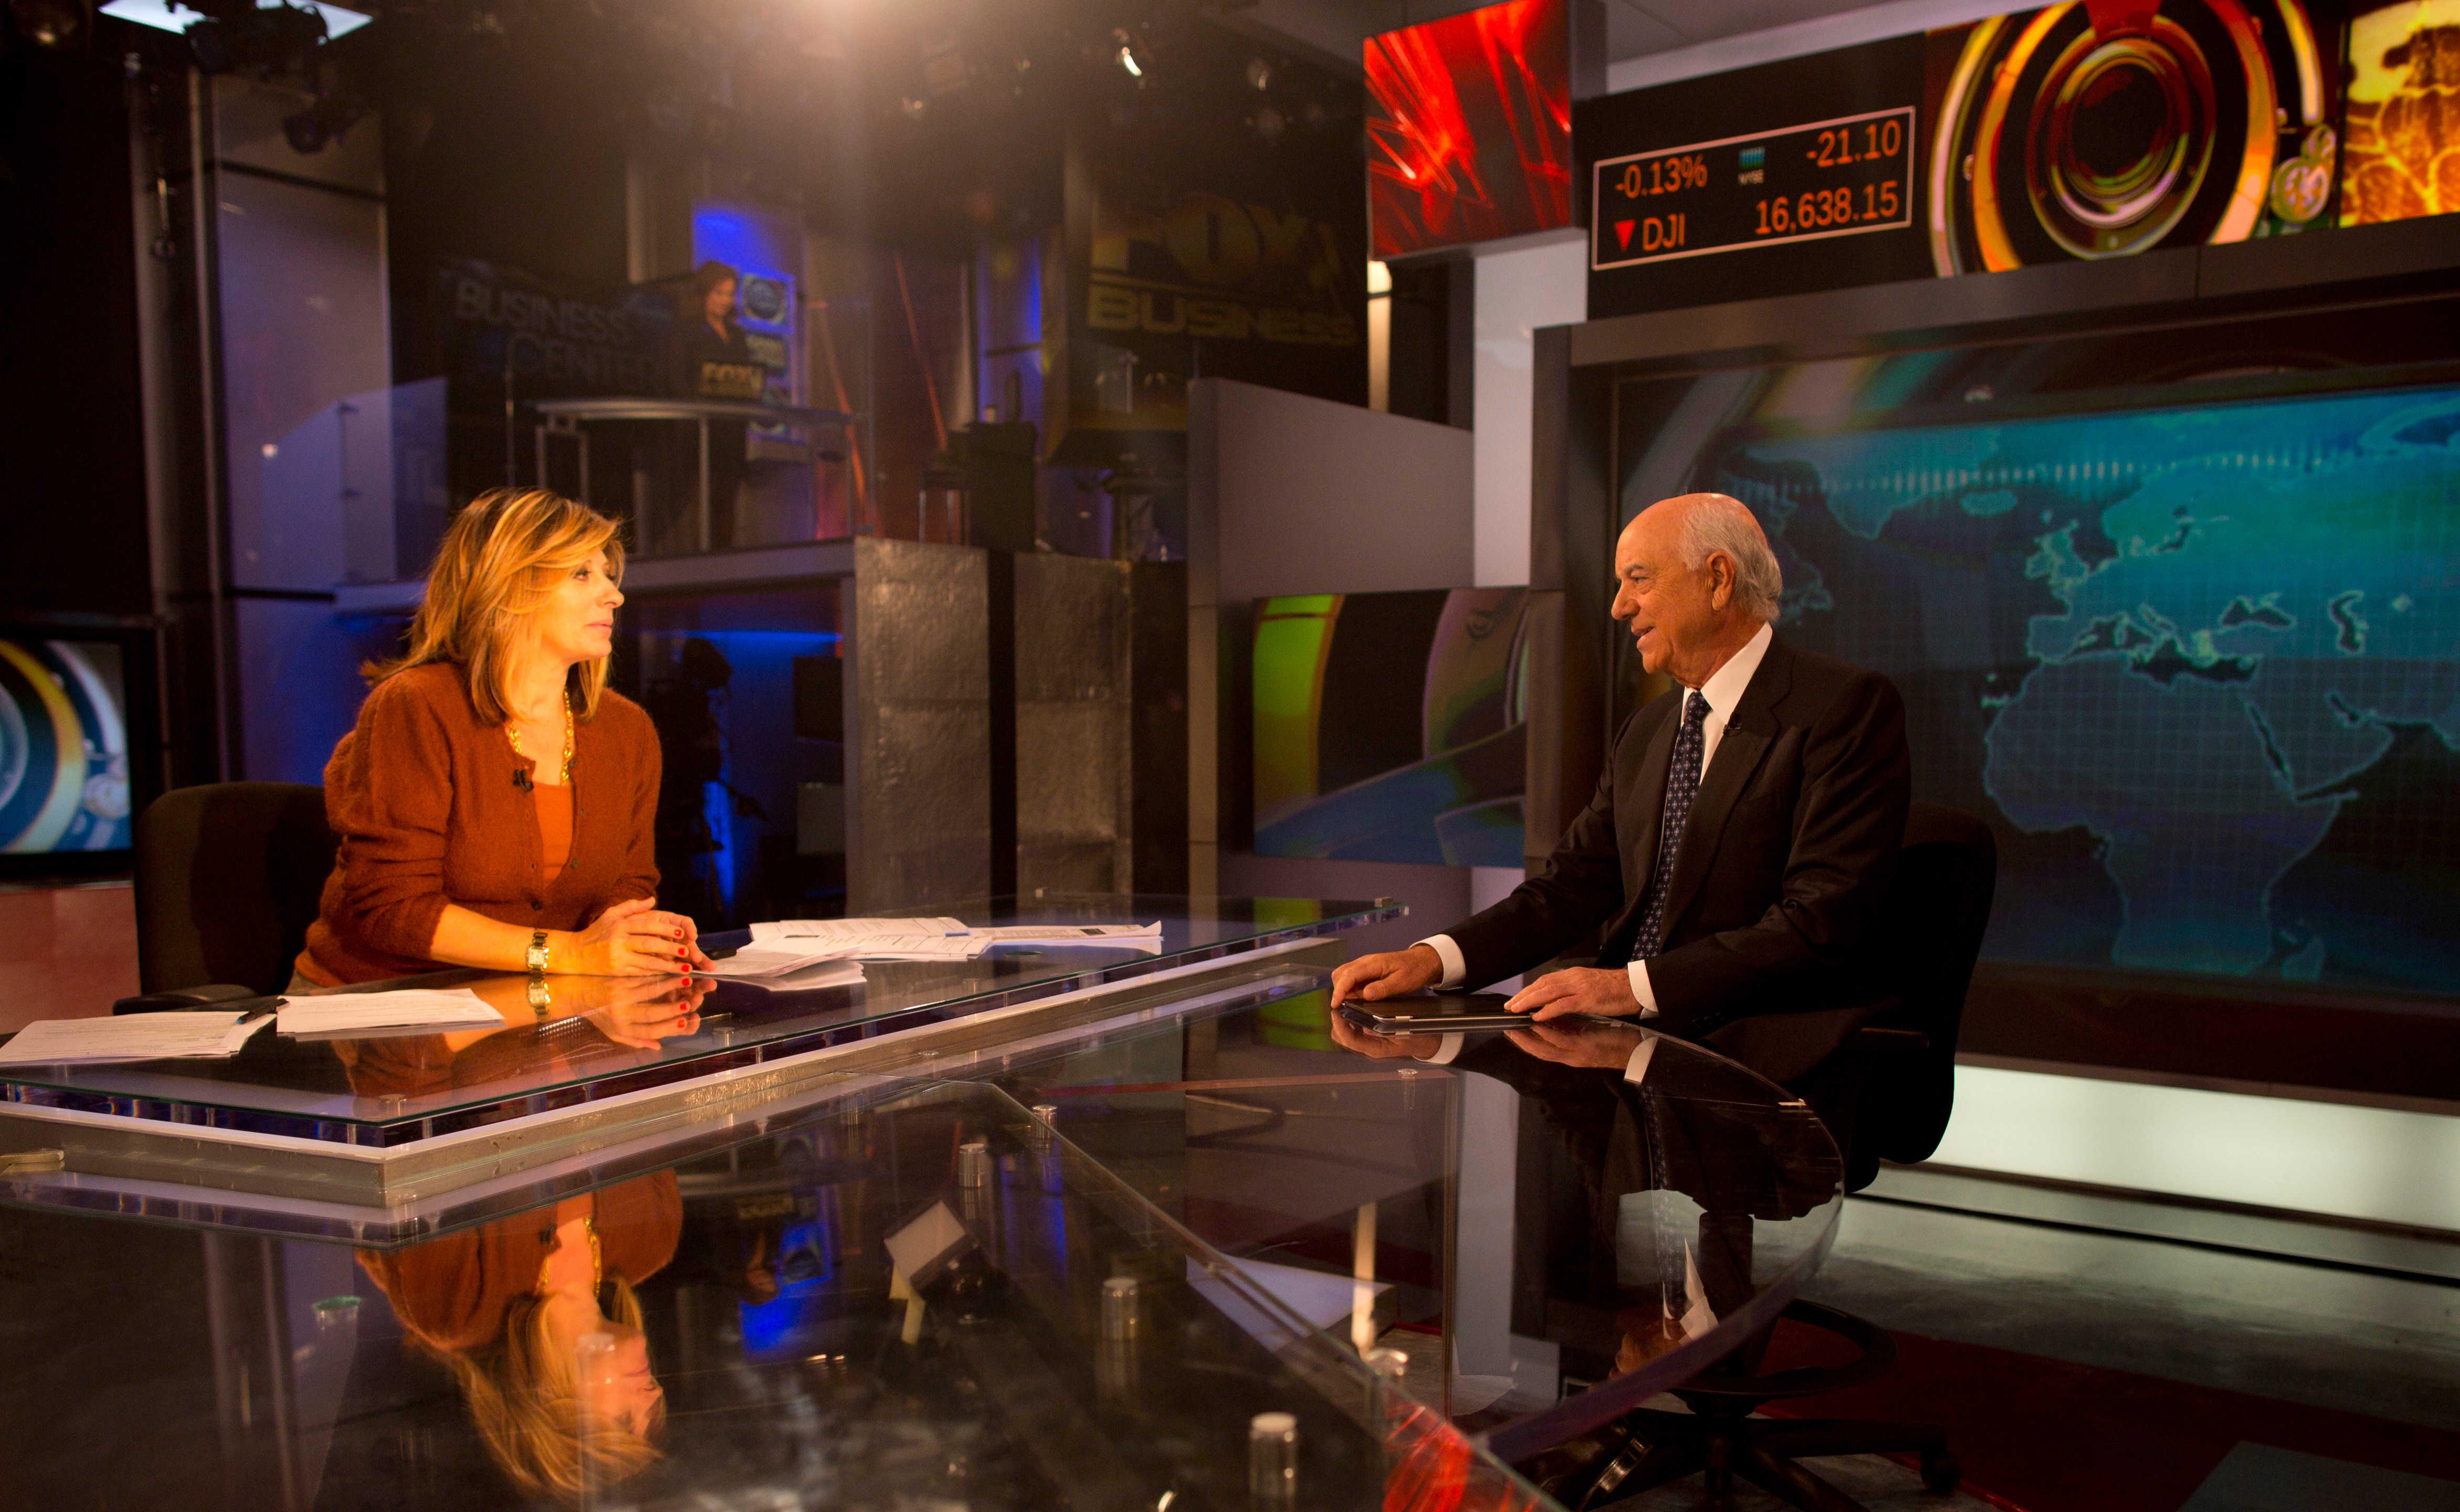 Picture of francisco gonzalez during the interview on 8216 fox business 8217